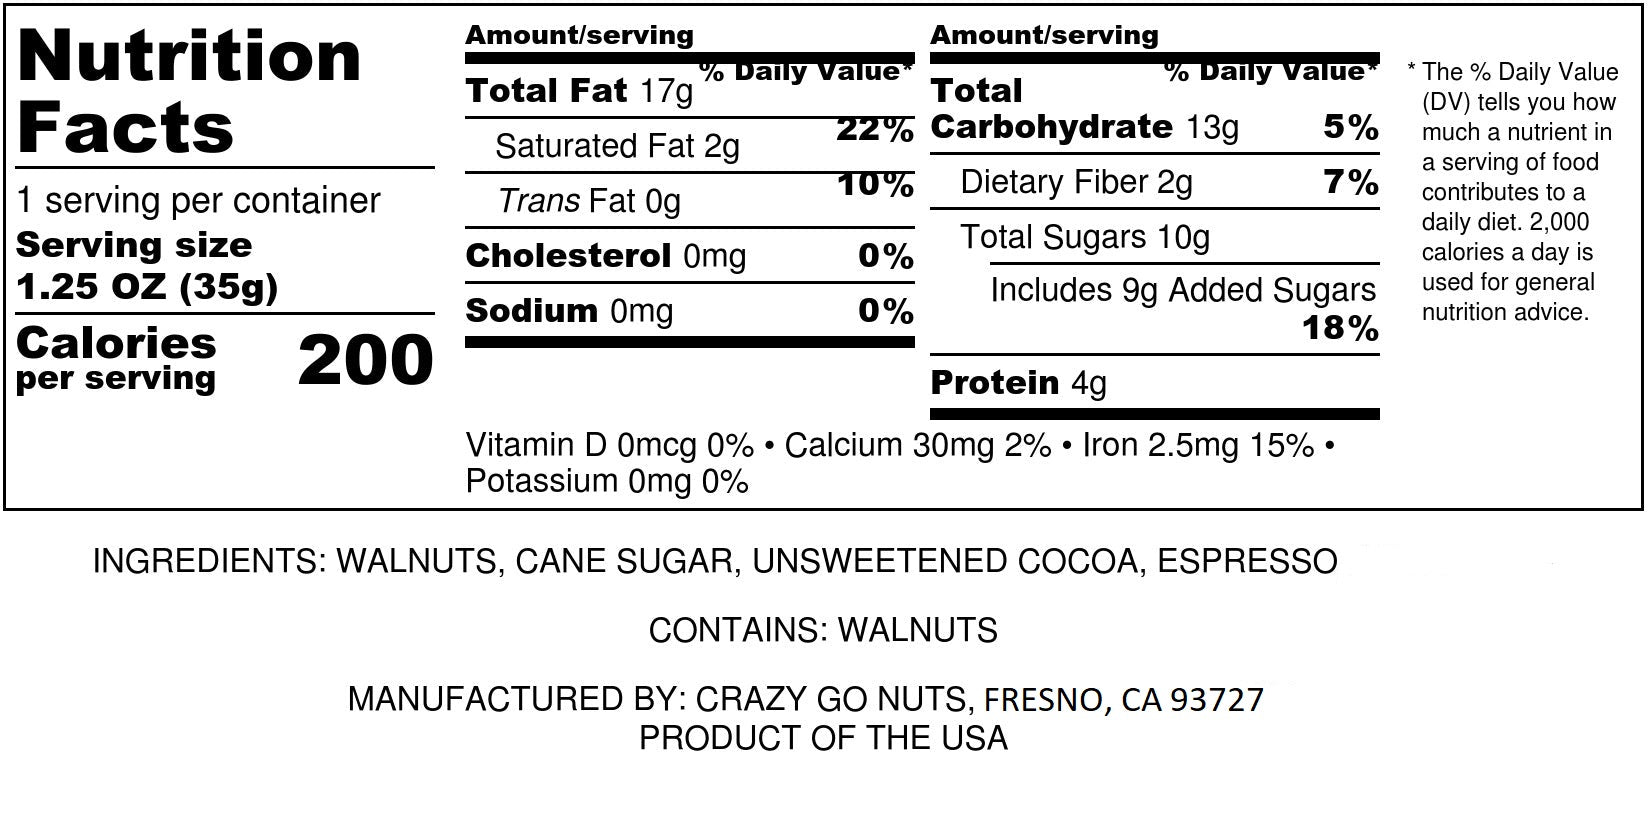 Nutrition panel for chocolate espresso coated walnut snacks. Ingredients include walnuts, cane sugar, cocoa, and espresso